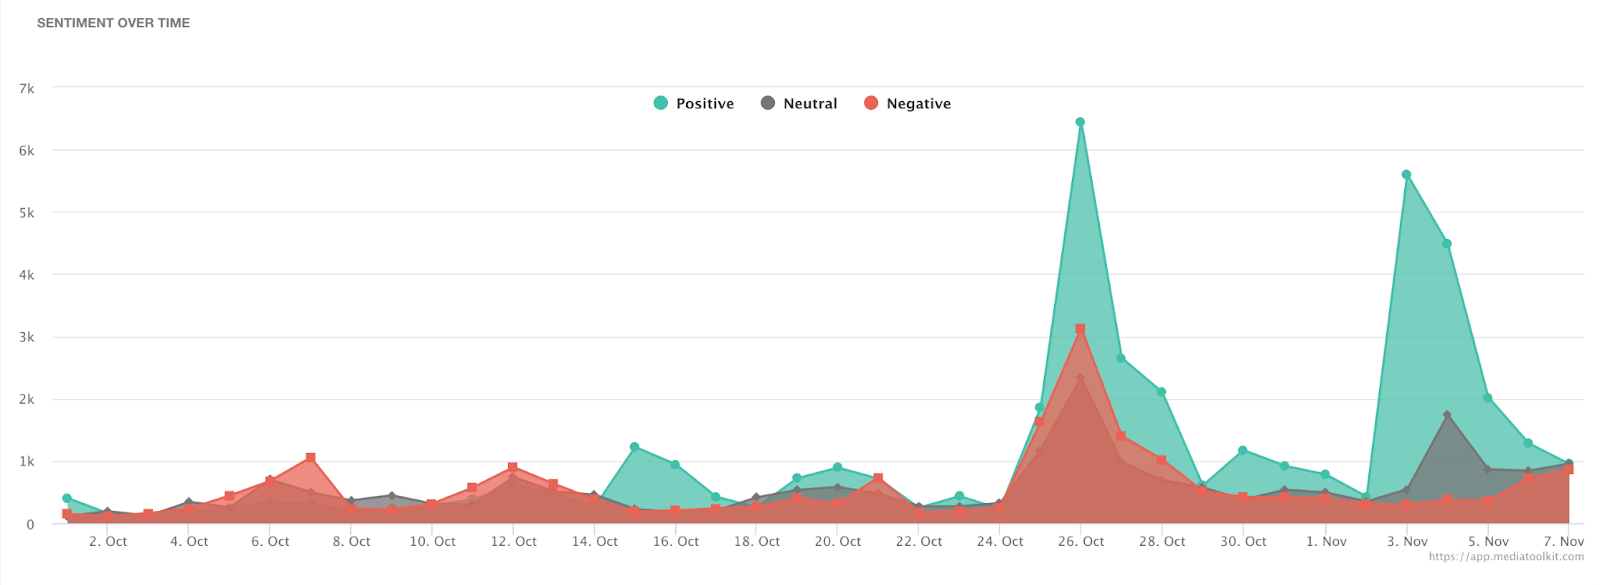 sentiment analysis of mentions of fetterman